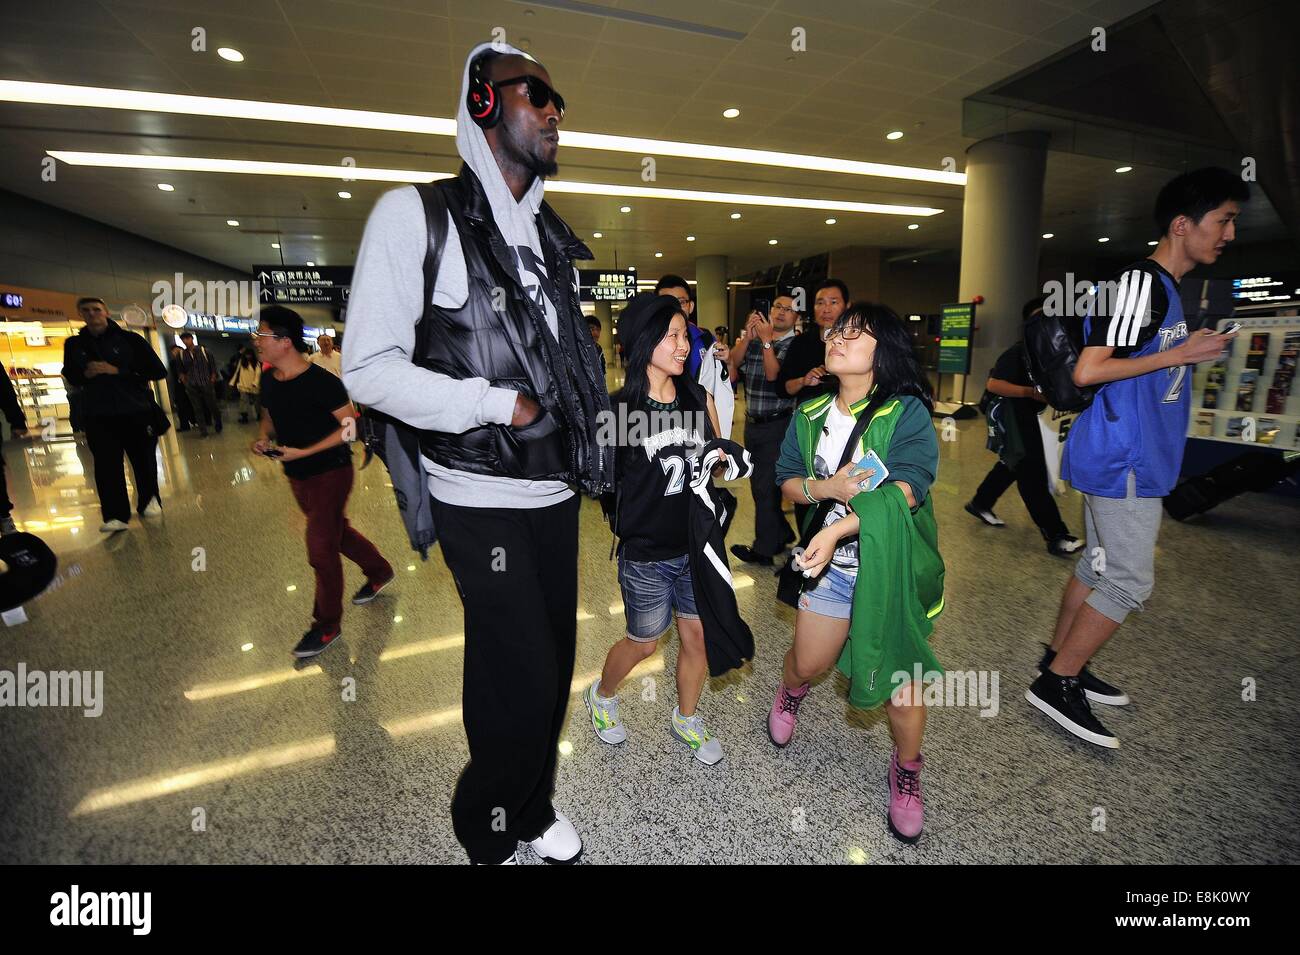 Shanghai, China. 9th Oct, 2014. The Brooklyn Nets player . KEVIN GARNETT after arraives at Pudong International Airport in Shanghai, China. Credit:  Marcio Machado/ZUMA Wire/Alamy Live News Stock Photo